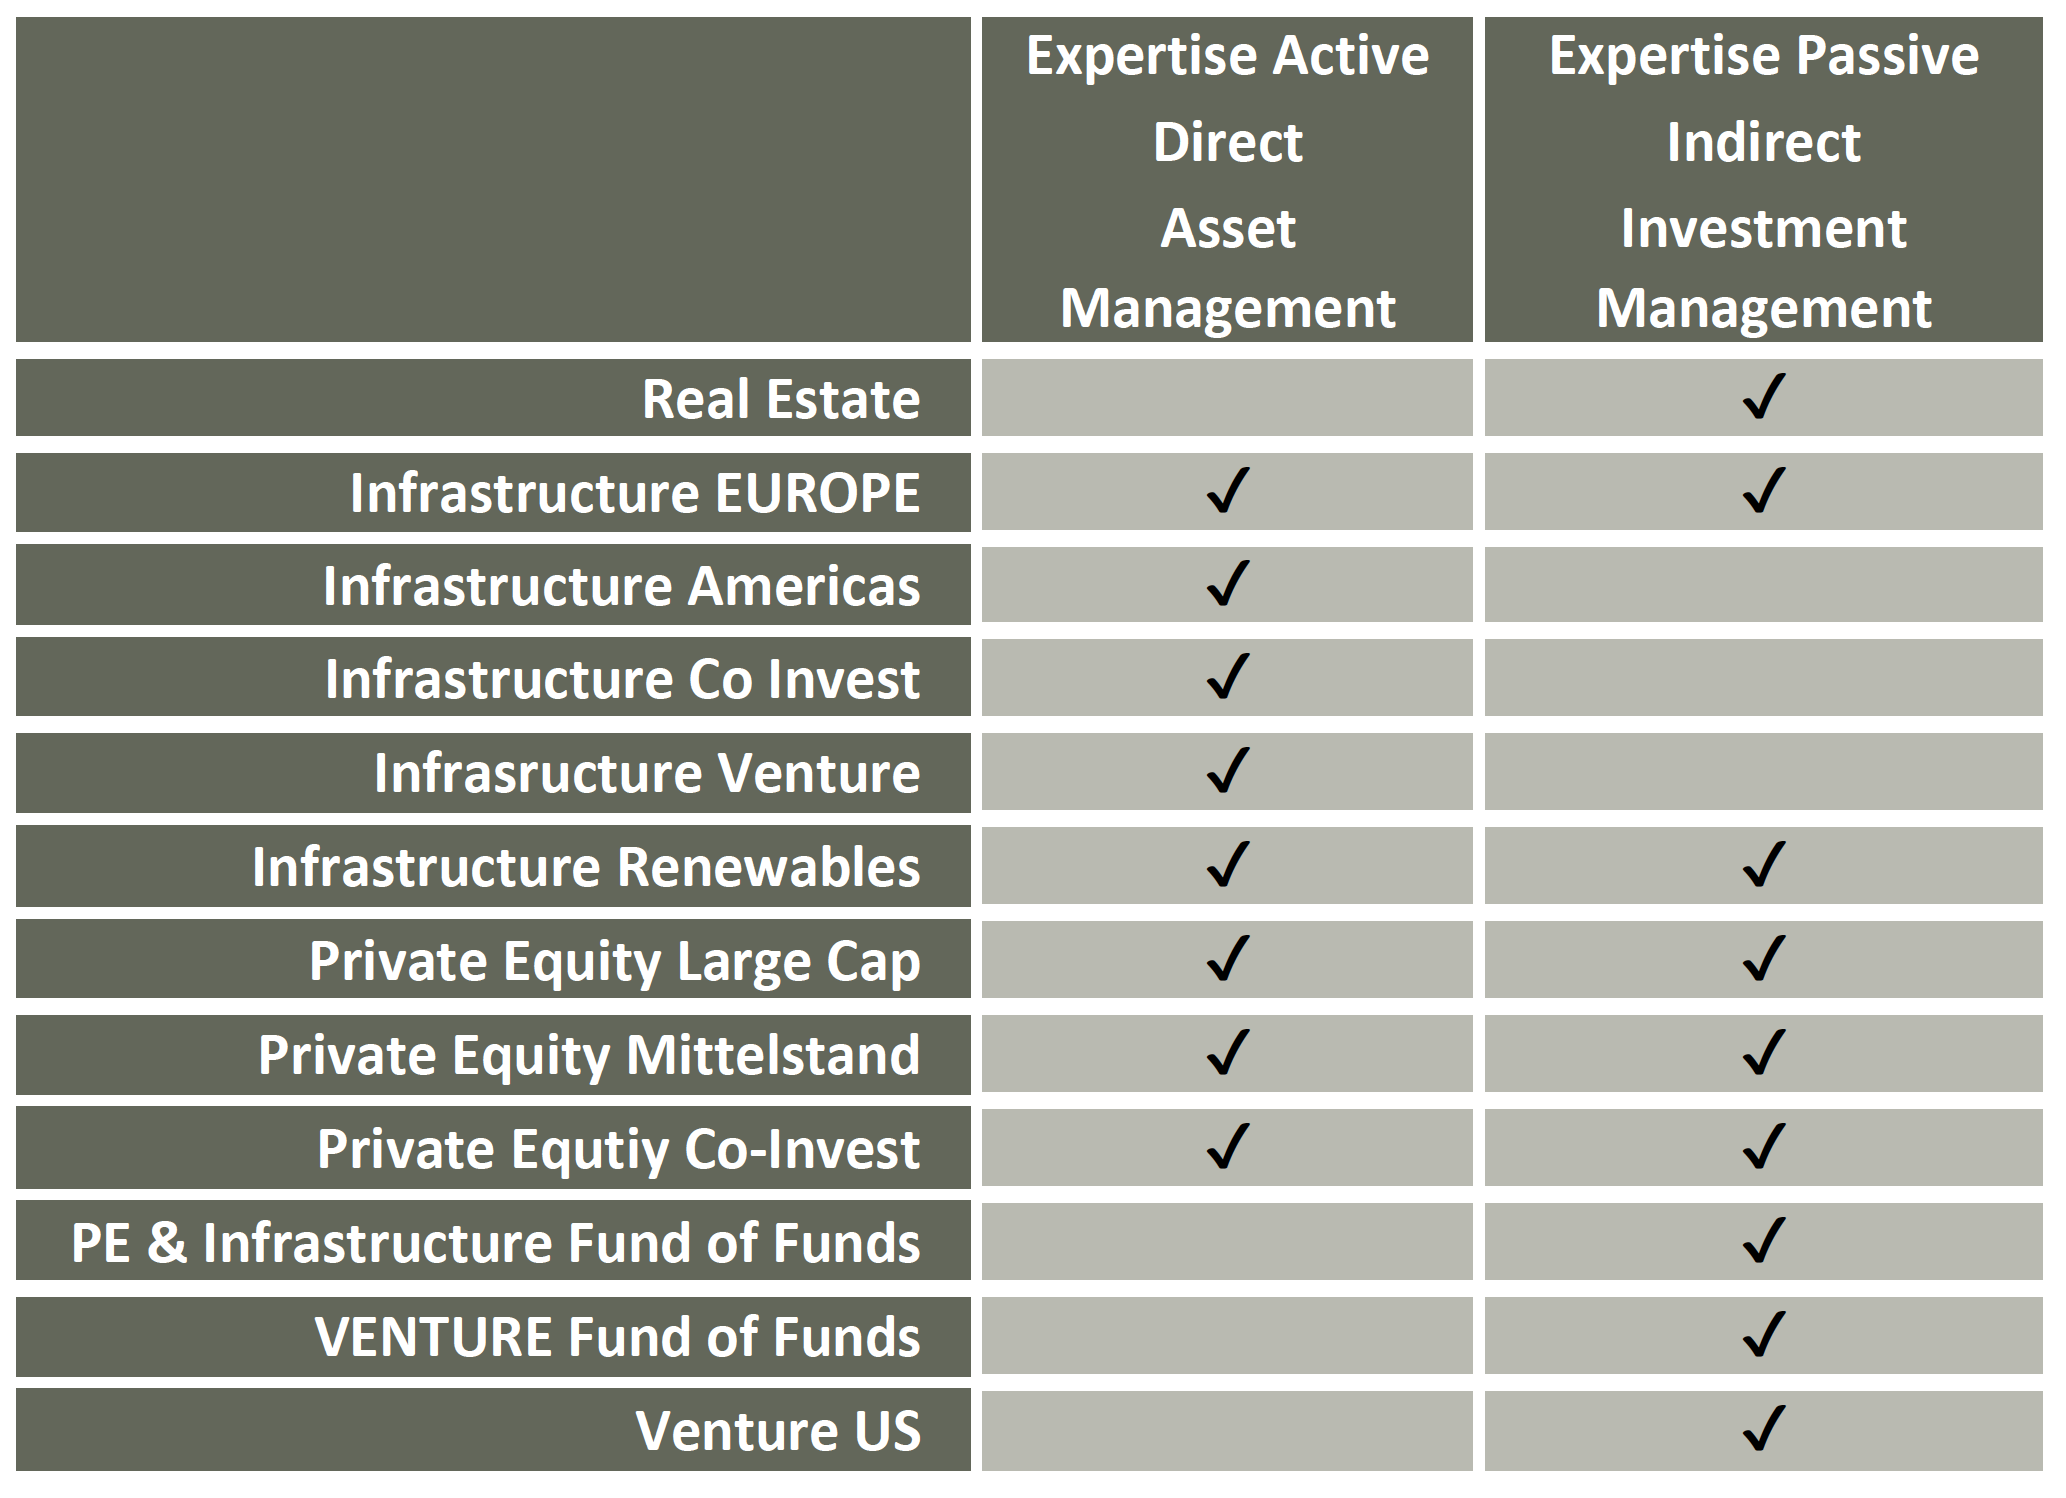 Table Active and passive experitise